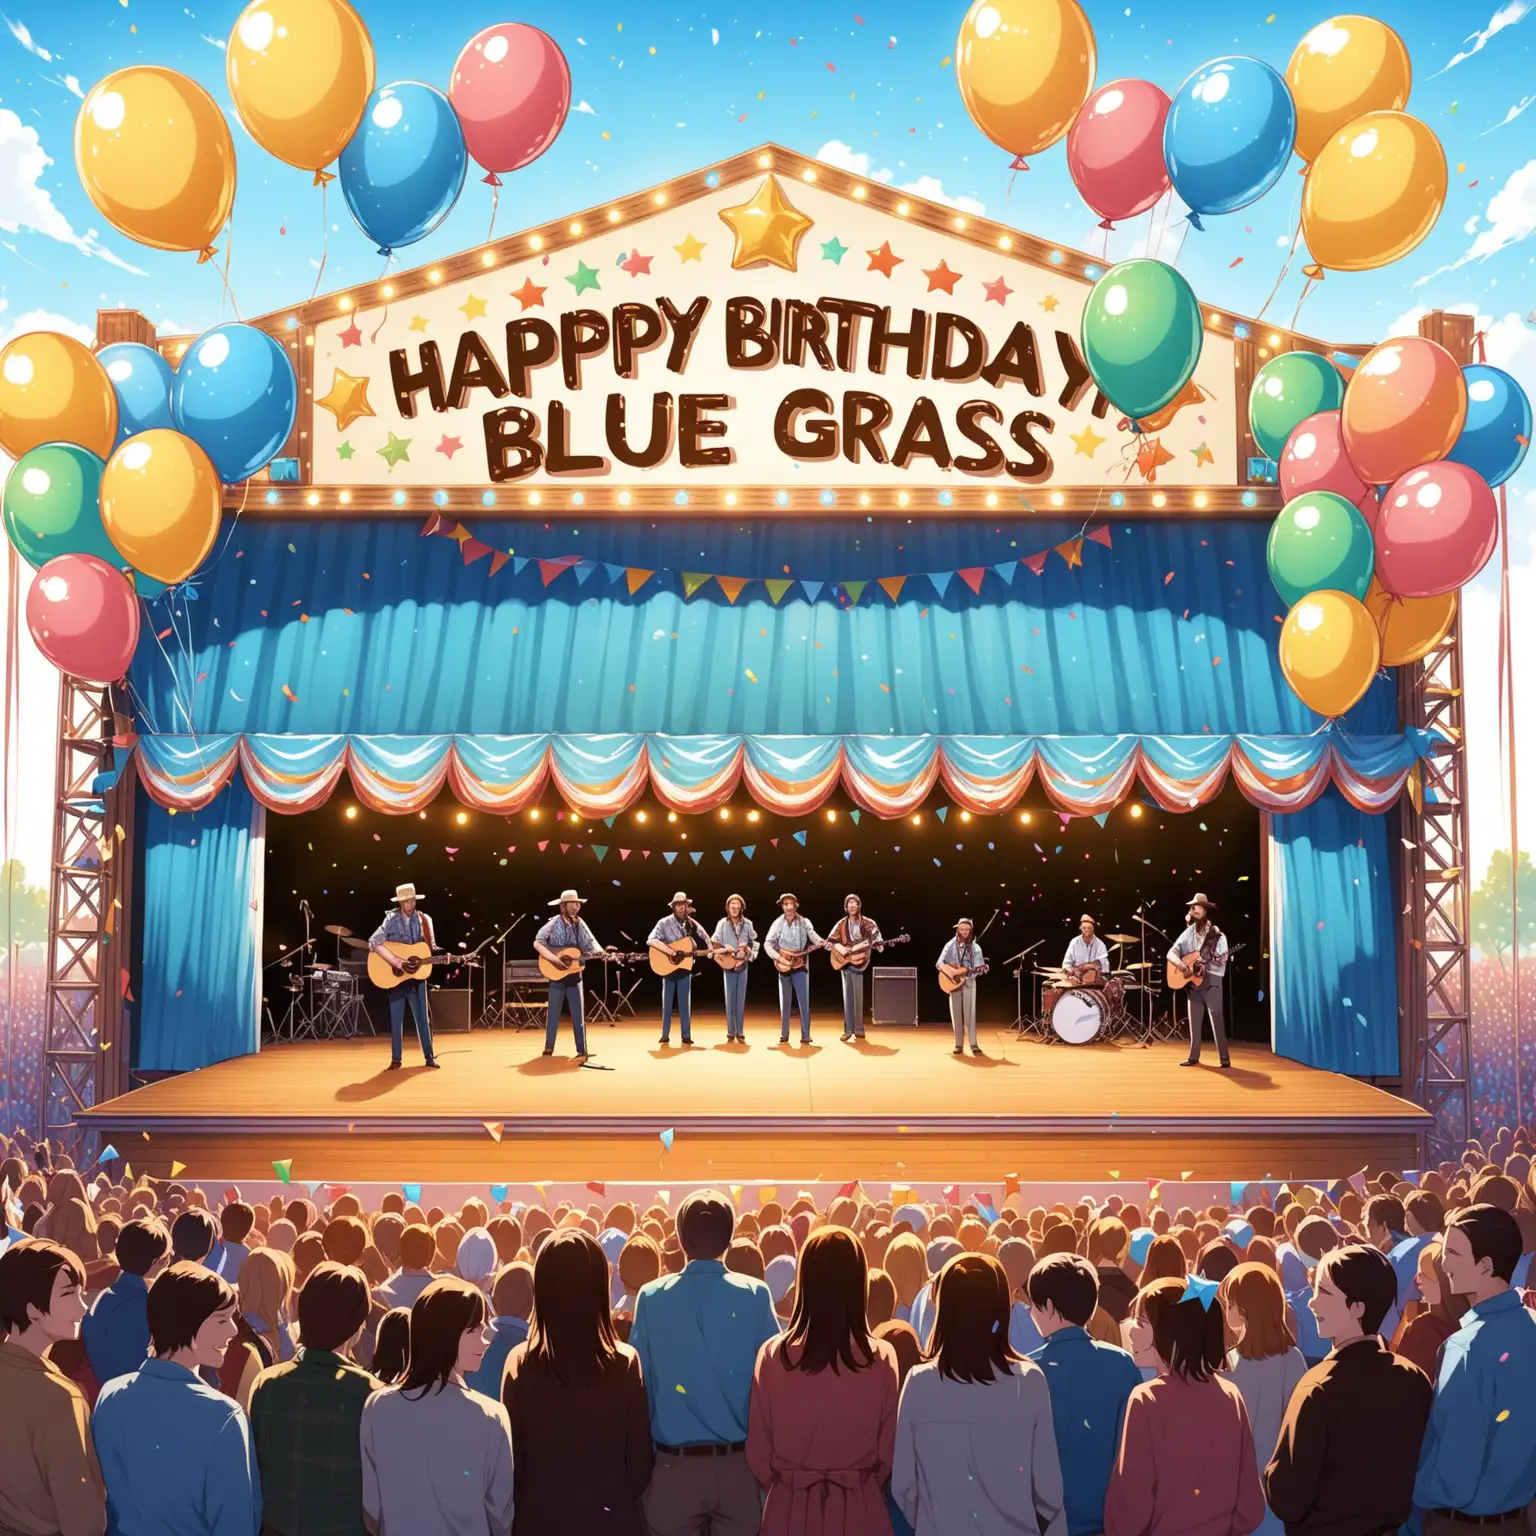 Outdoor Birthday Celebration with Blue Grass Band and Balloons